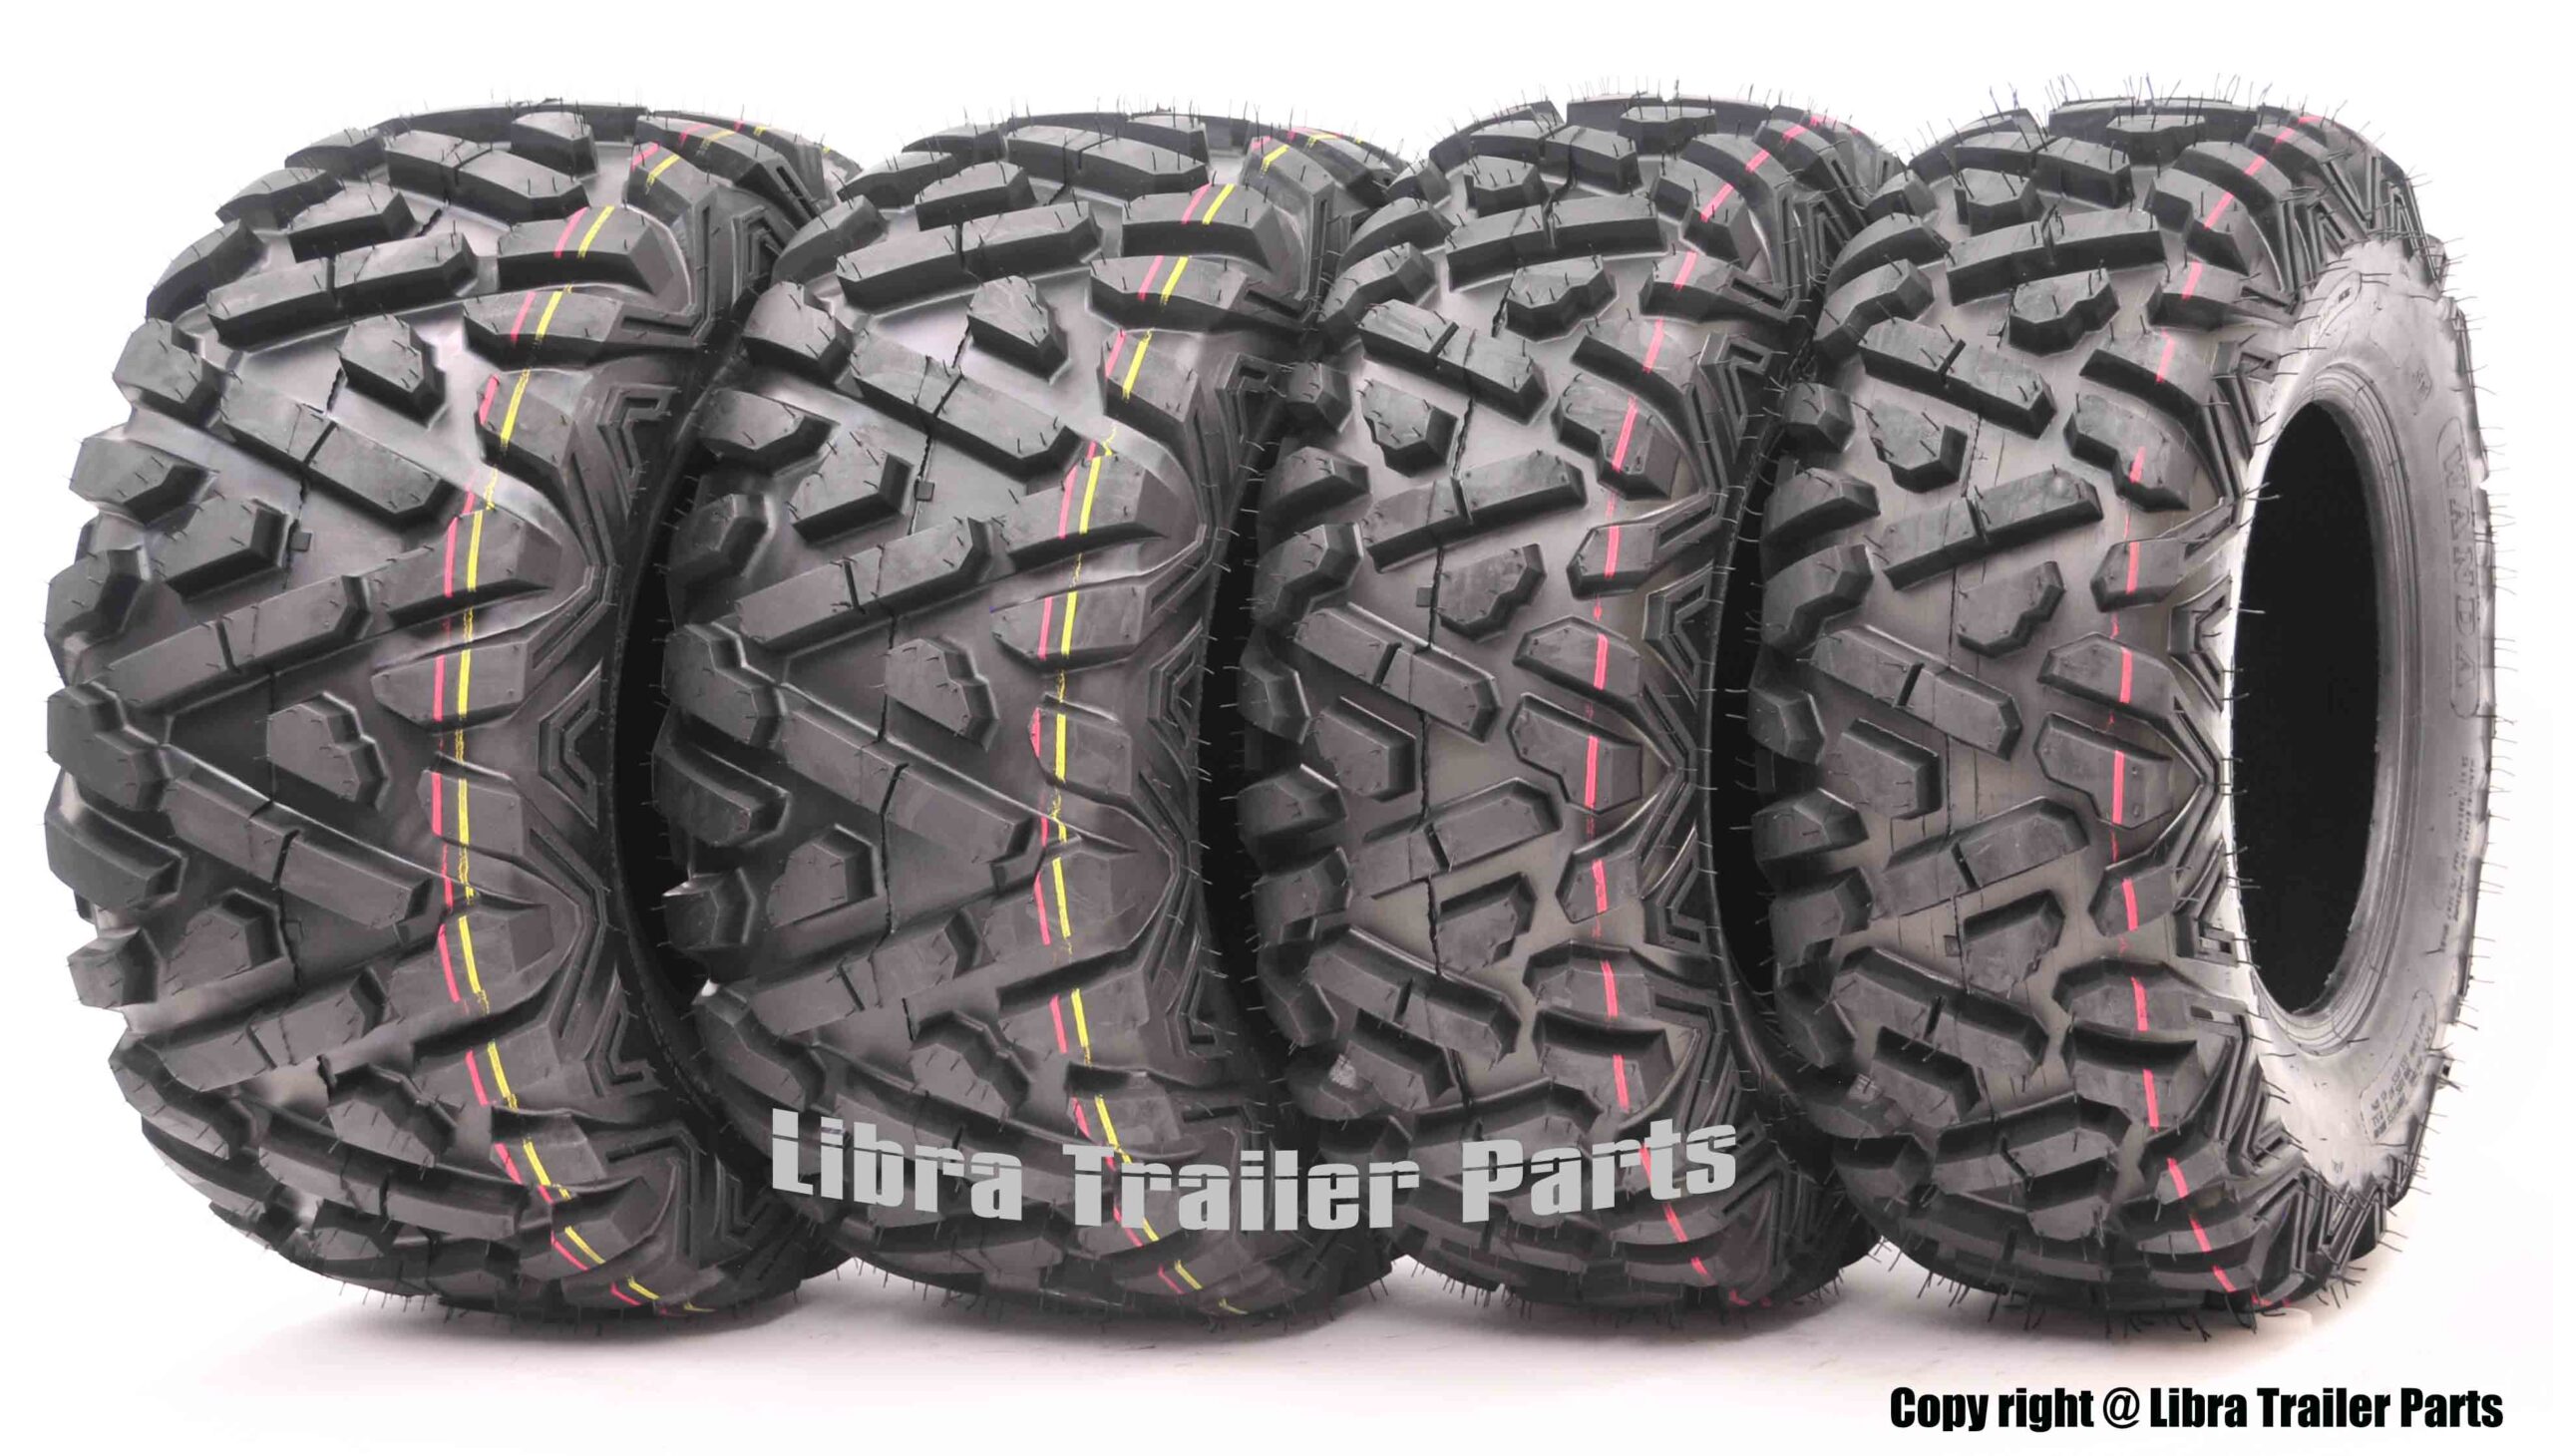 Need Bigger Tires for Your ATV. Consider These 25x11 12 Options